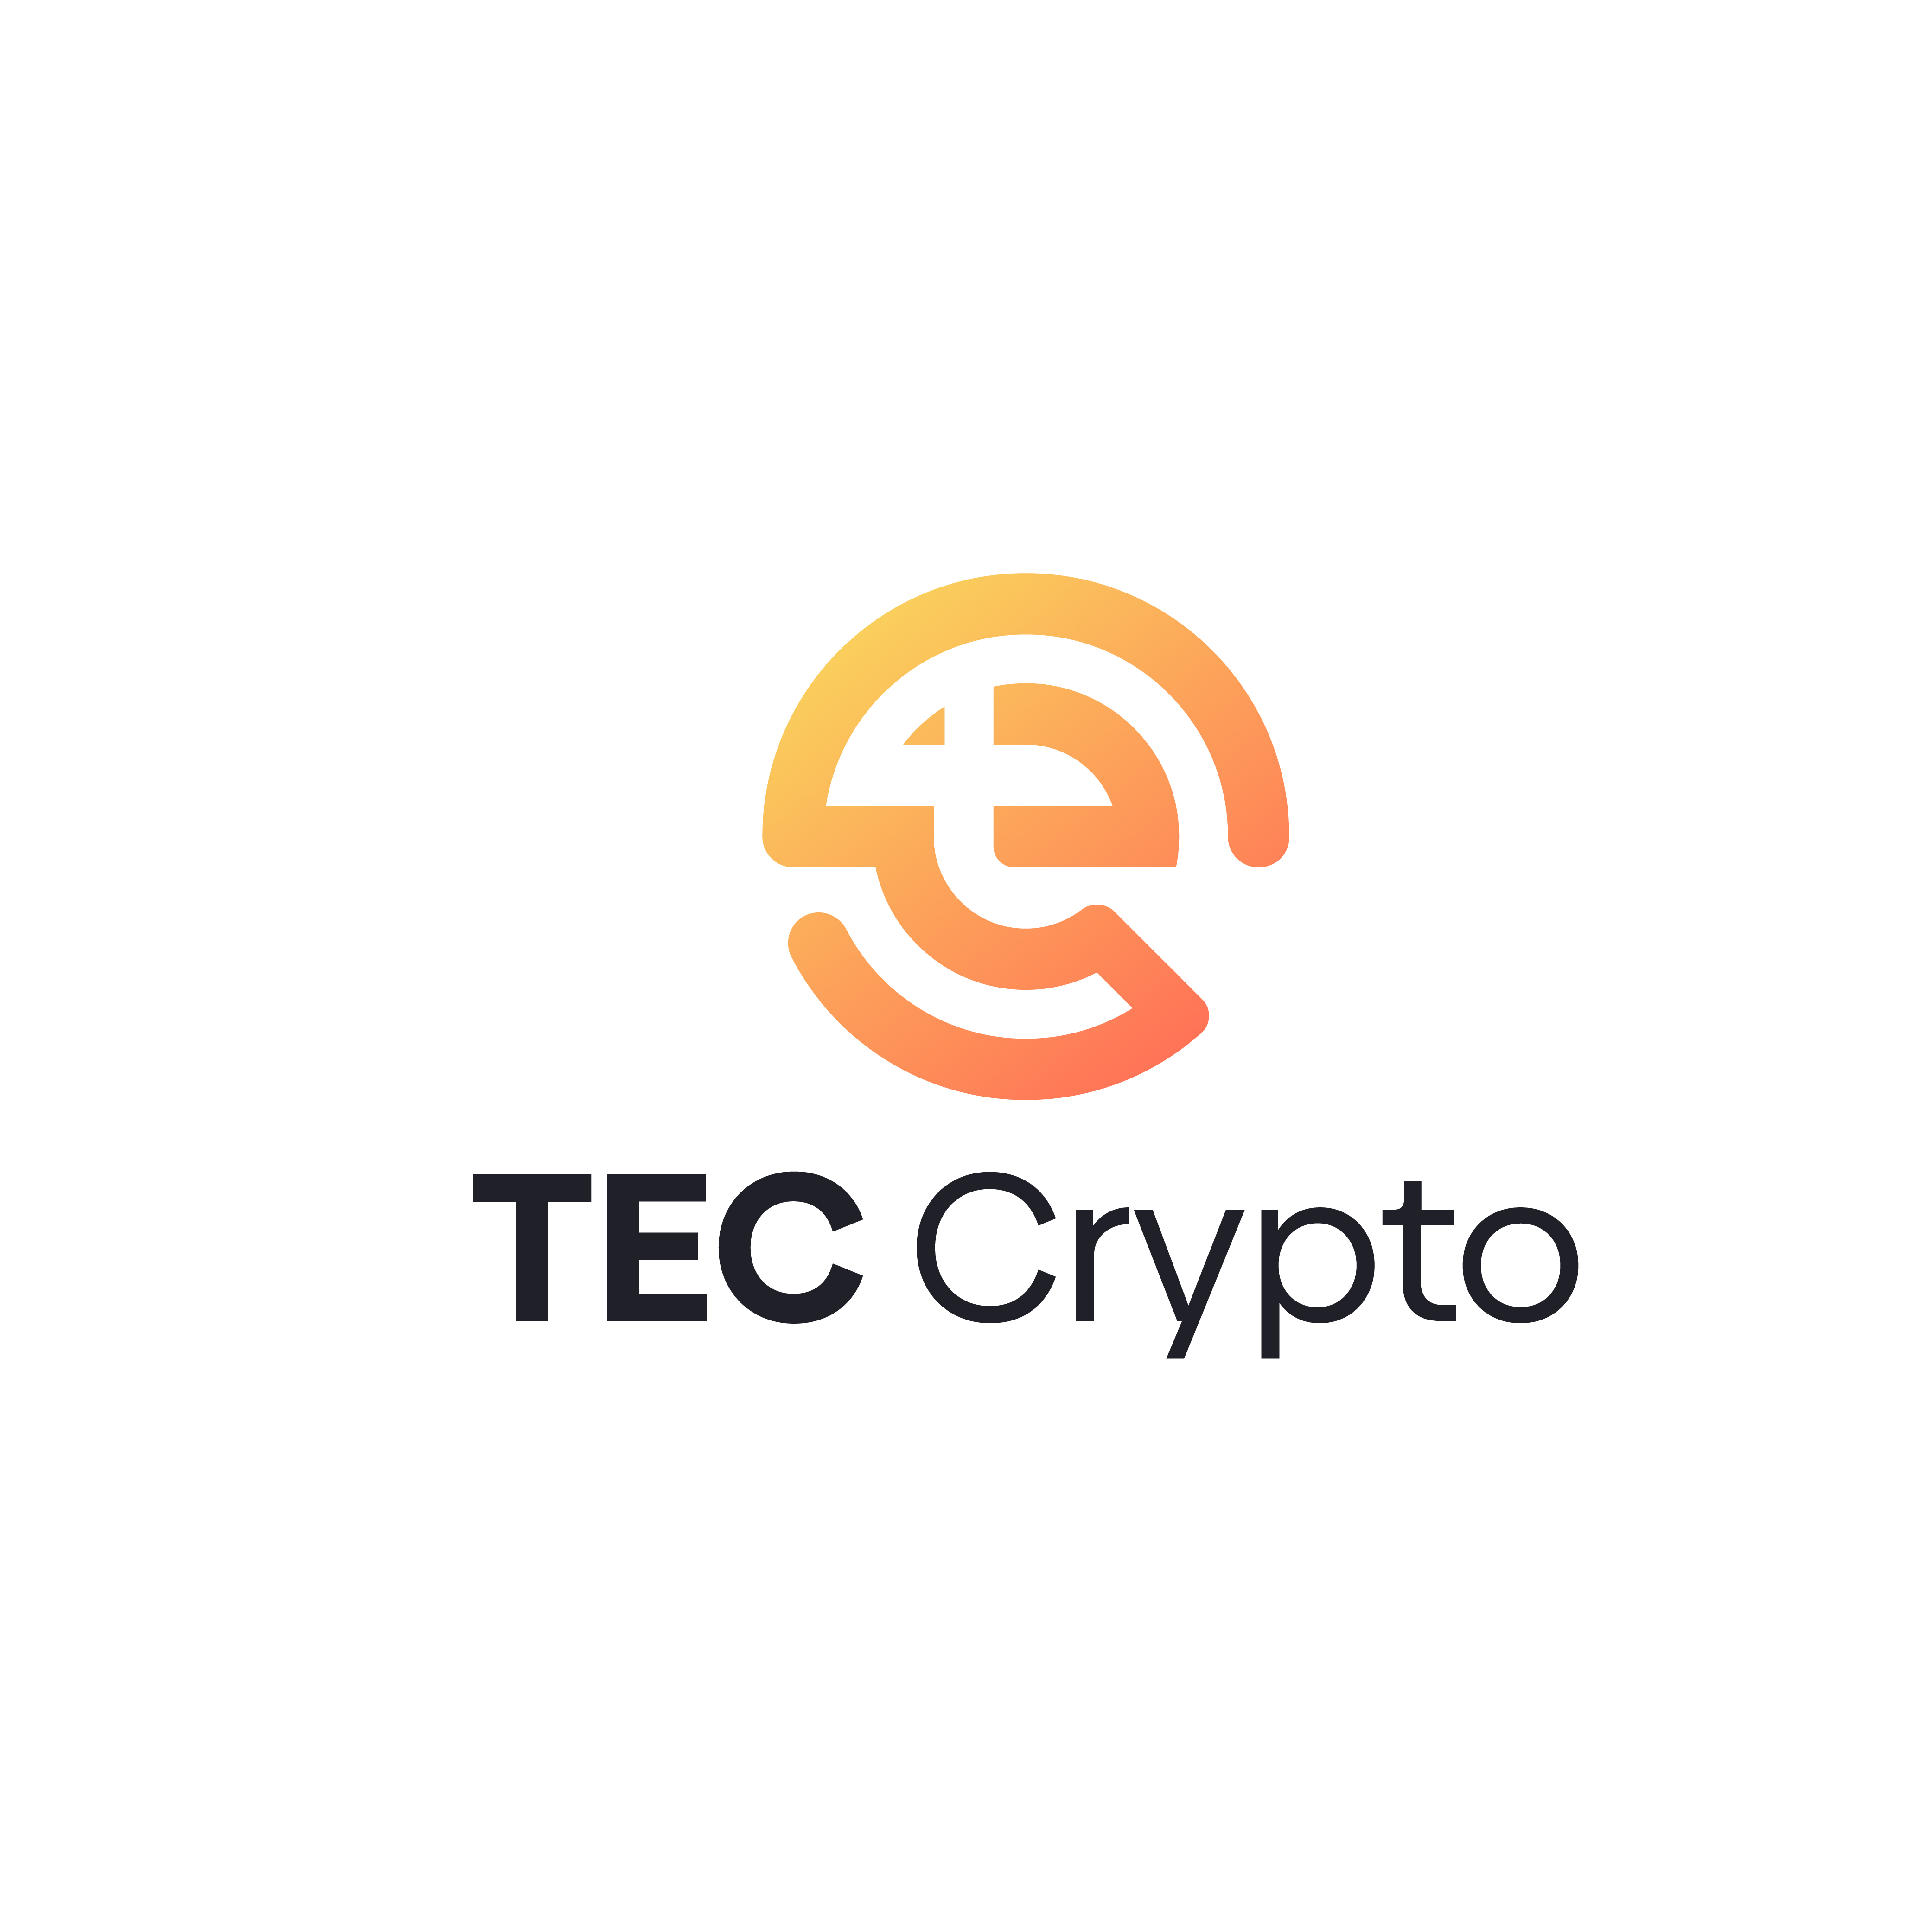 TecCrypto's Global Data Center Launch Boosts Opportunities in Cloud Mining